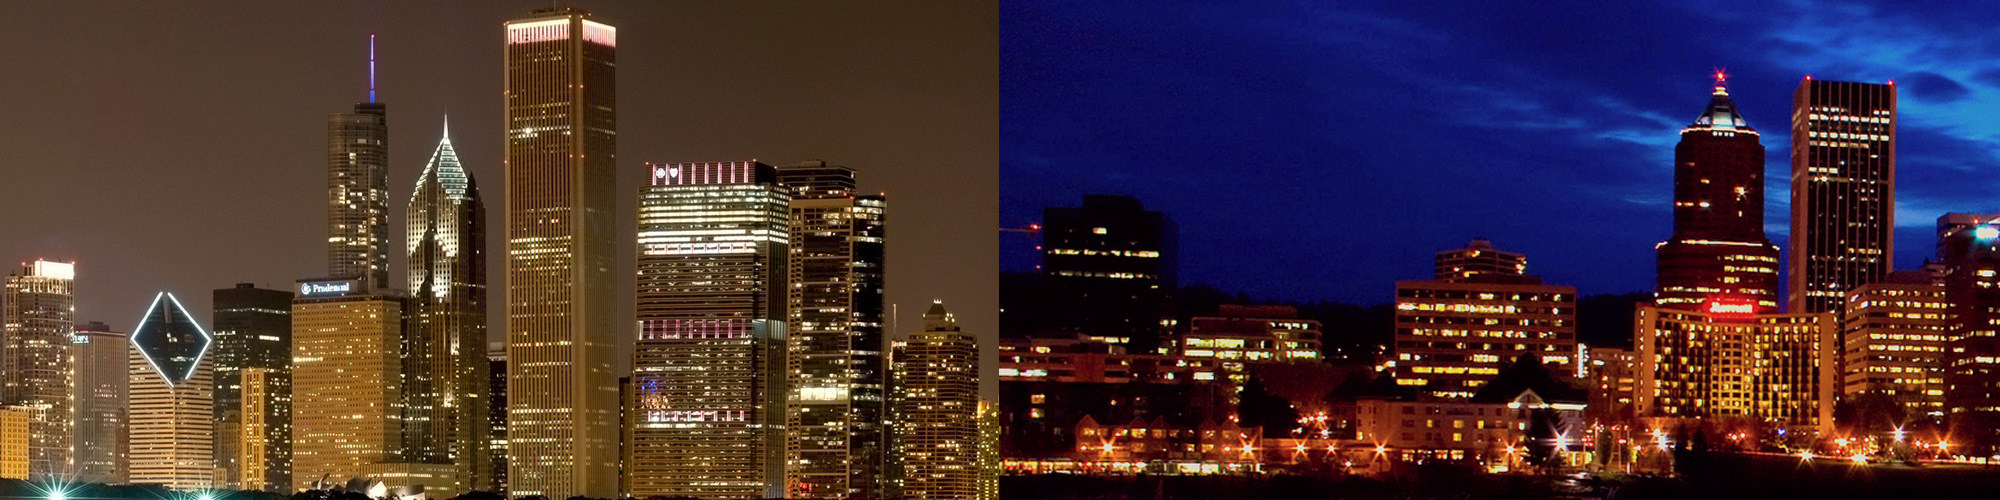 Chicago and Portland at Night